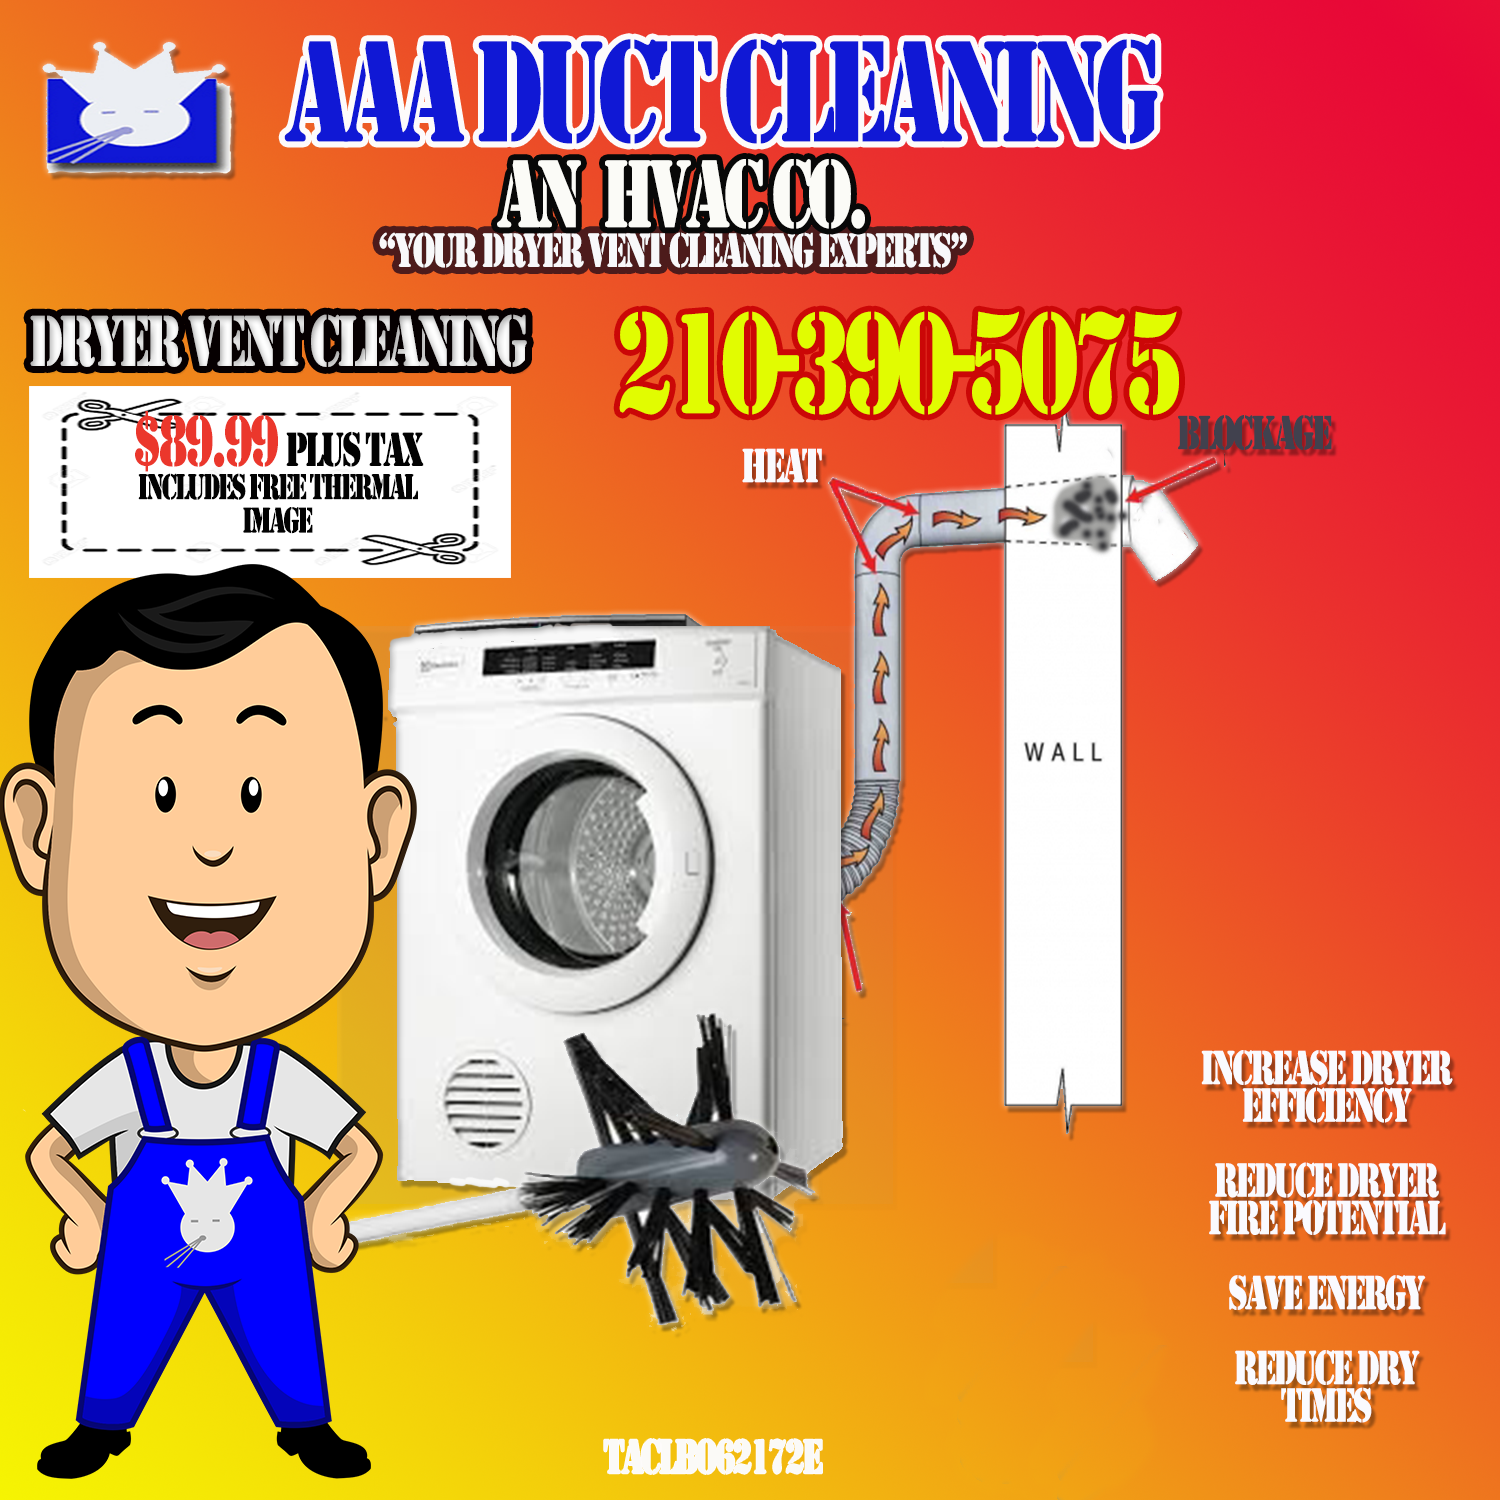 Dryer Vent Cleaning Company Located in San Antonio. Call For your next appointment for annual dryer vent cleaning San Antonio.